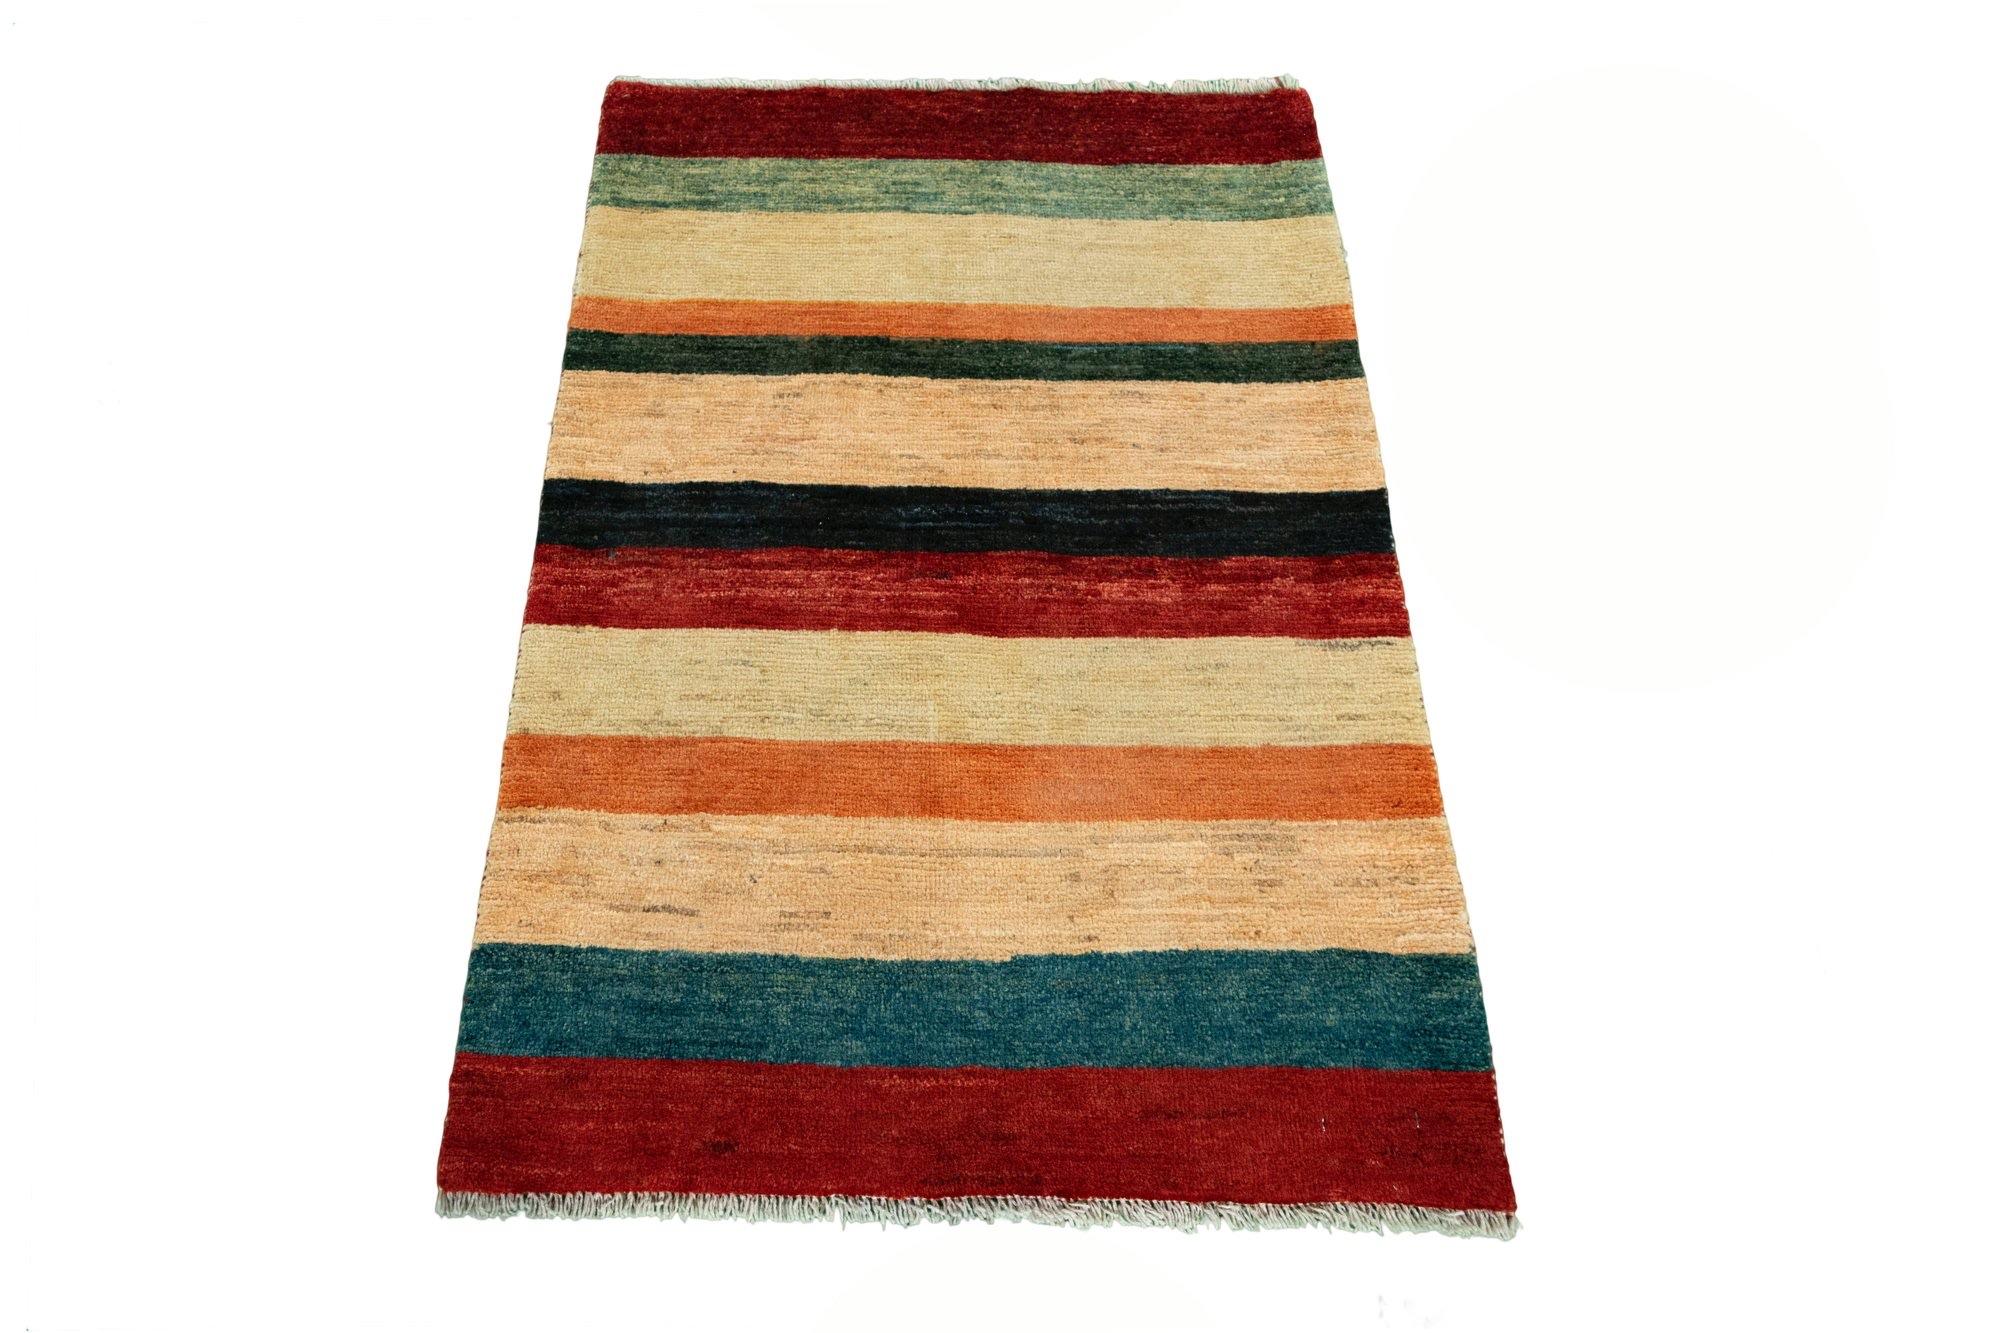 Gabbeh Persian Nomad Rug

Gabbeh rugs are often simply patterned and not particularly detailed.
However, these are the most famous nomadic carpets of Iran. Gabbeh carpets are knotted by the nomads of the Ghashghai tribe in the province of Fars in